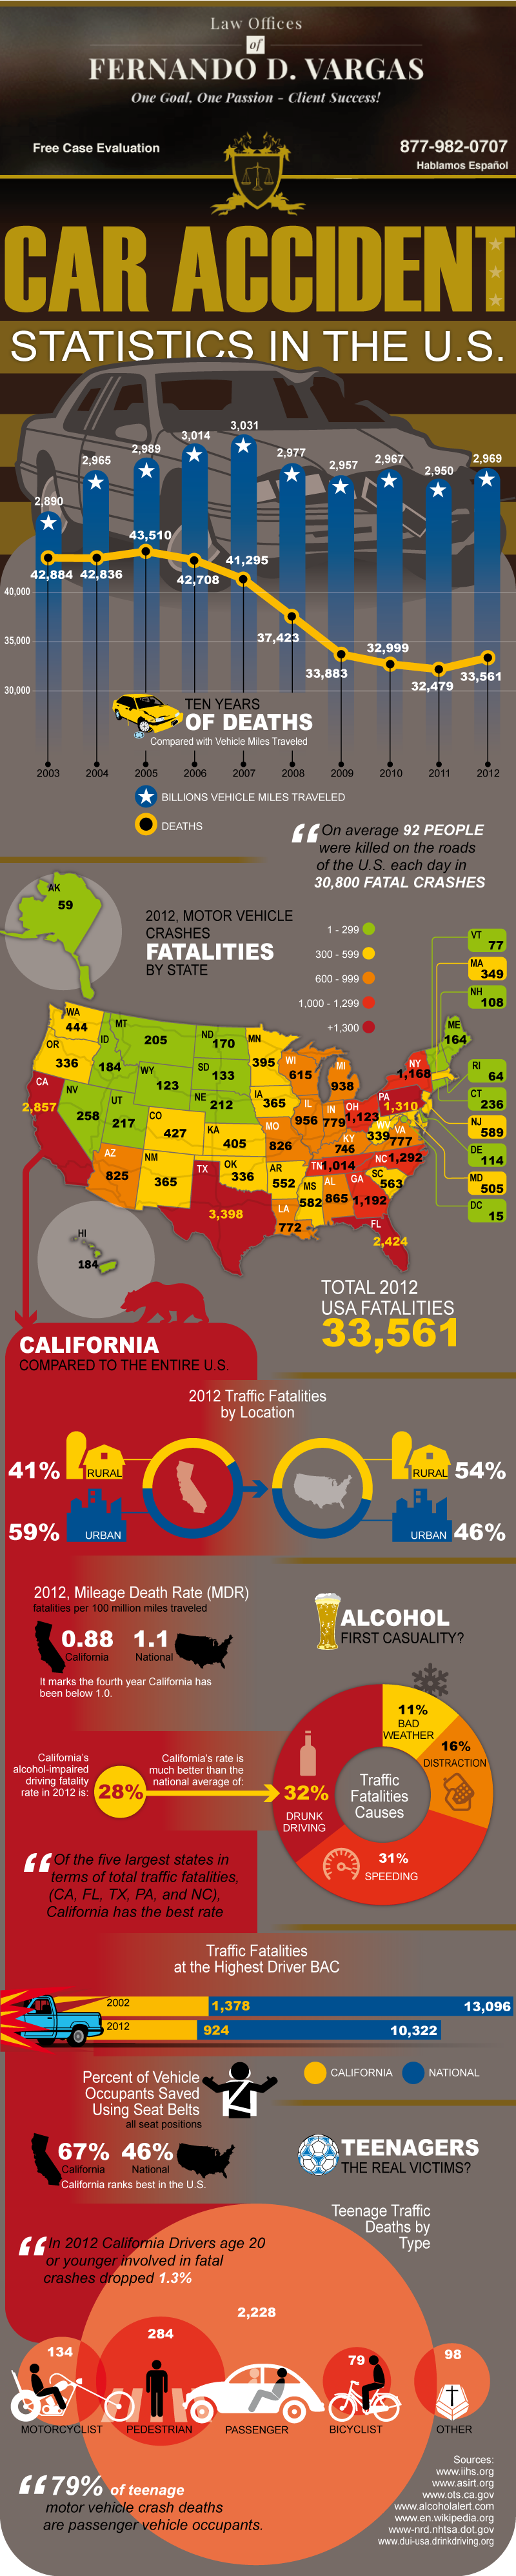 Car Accident Statistics In The U.S. Infographic